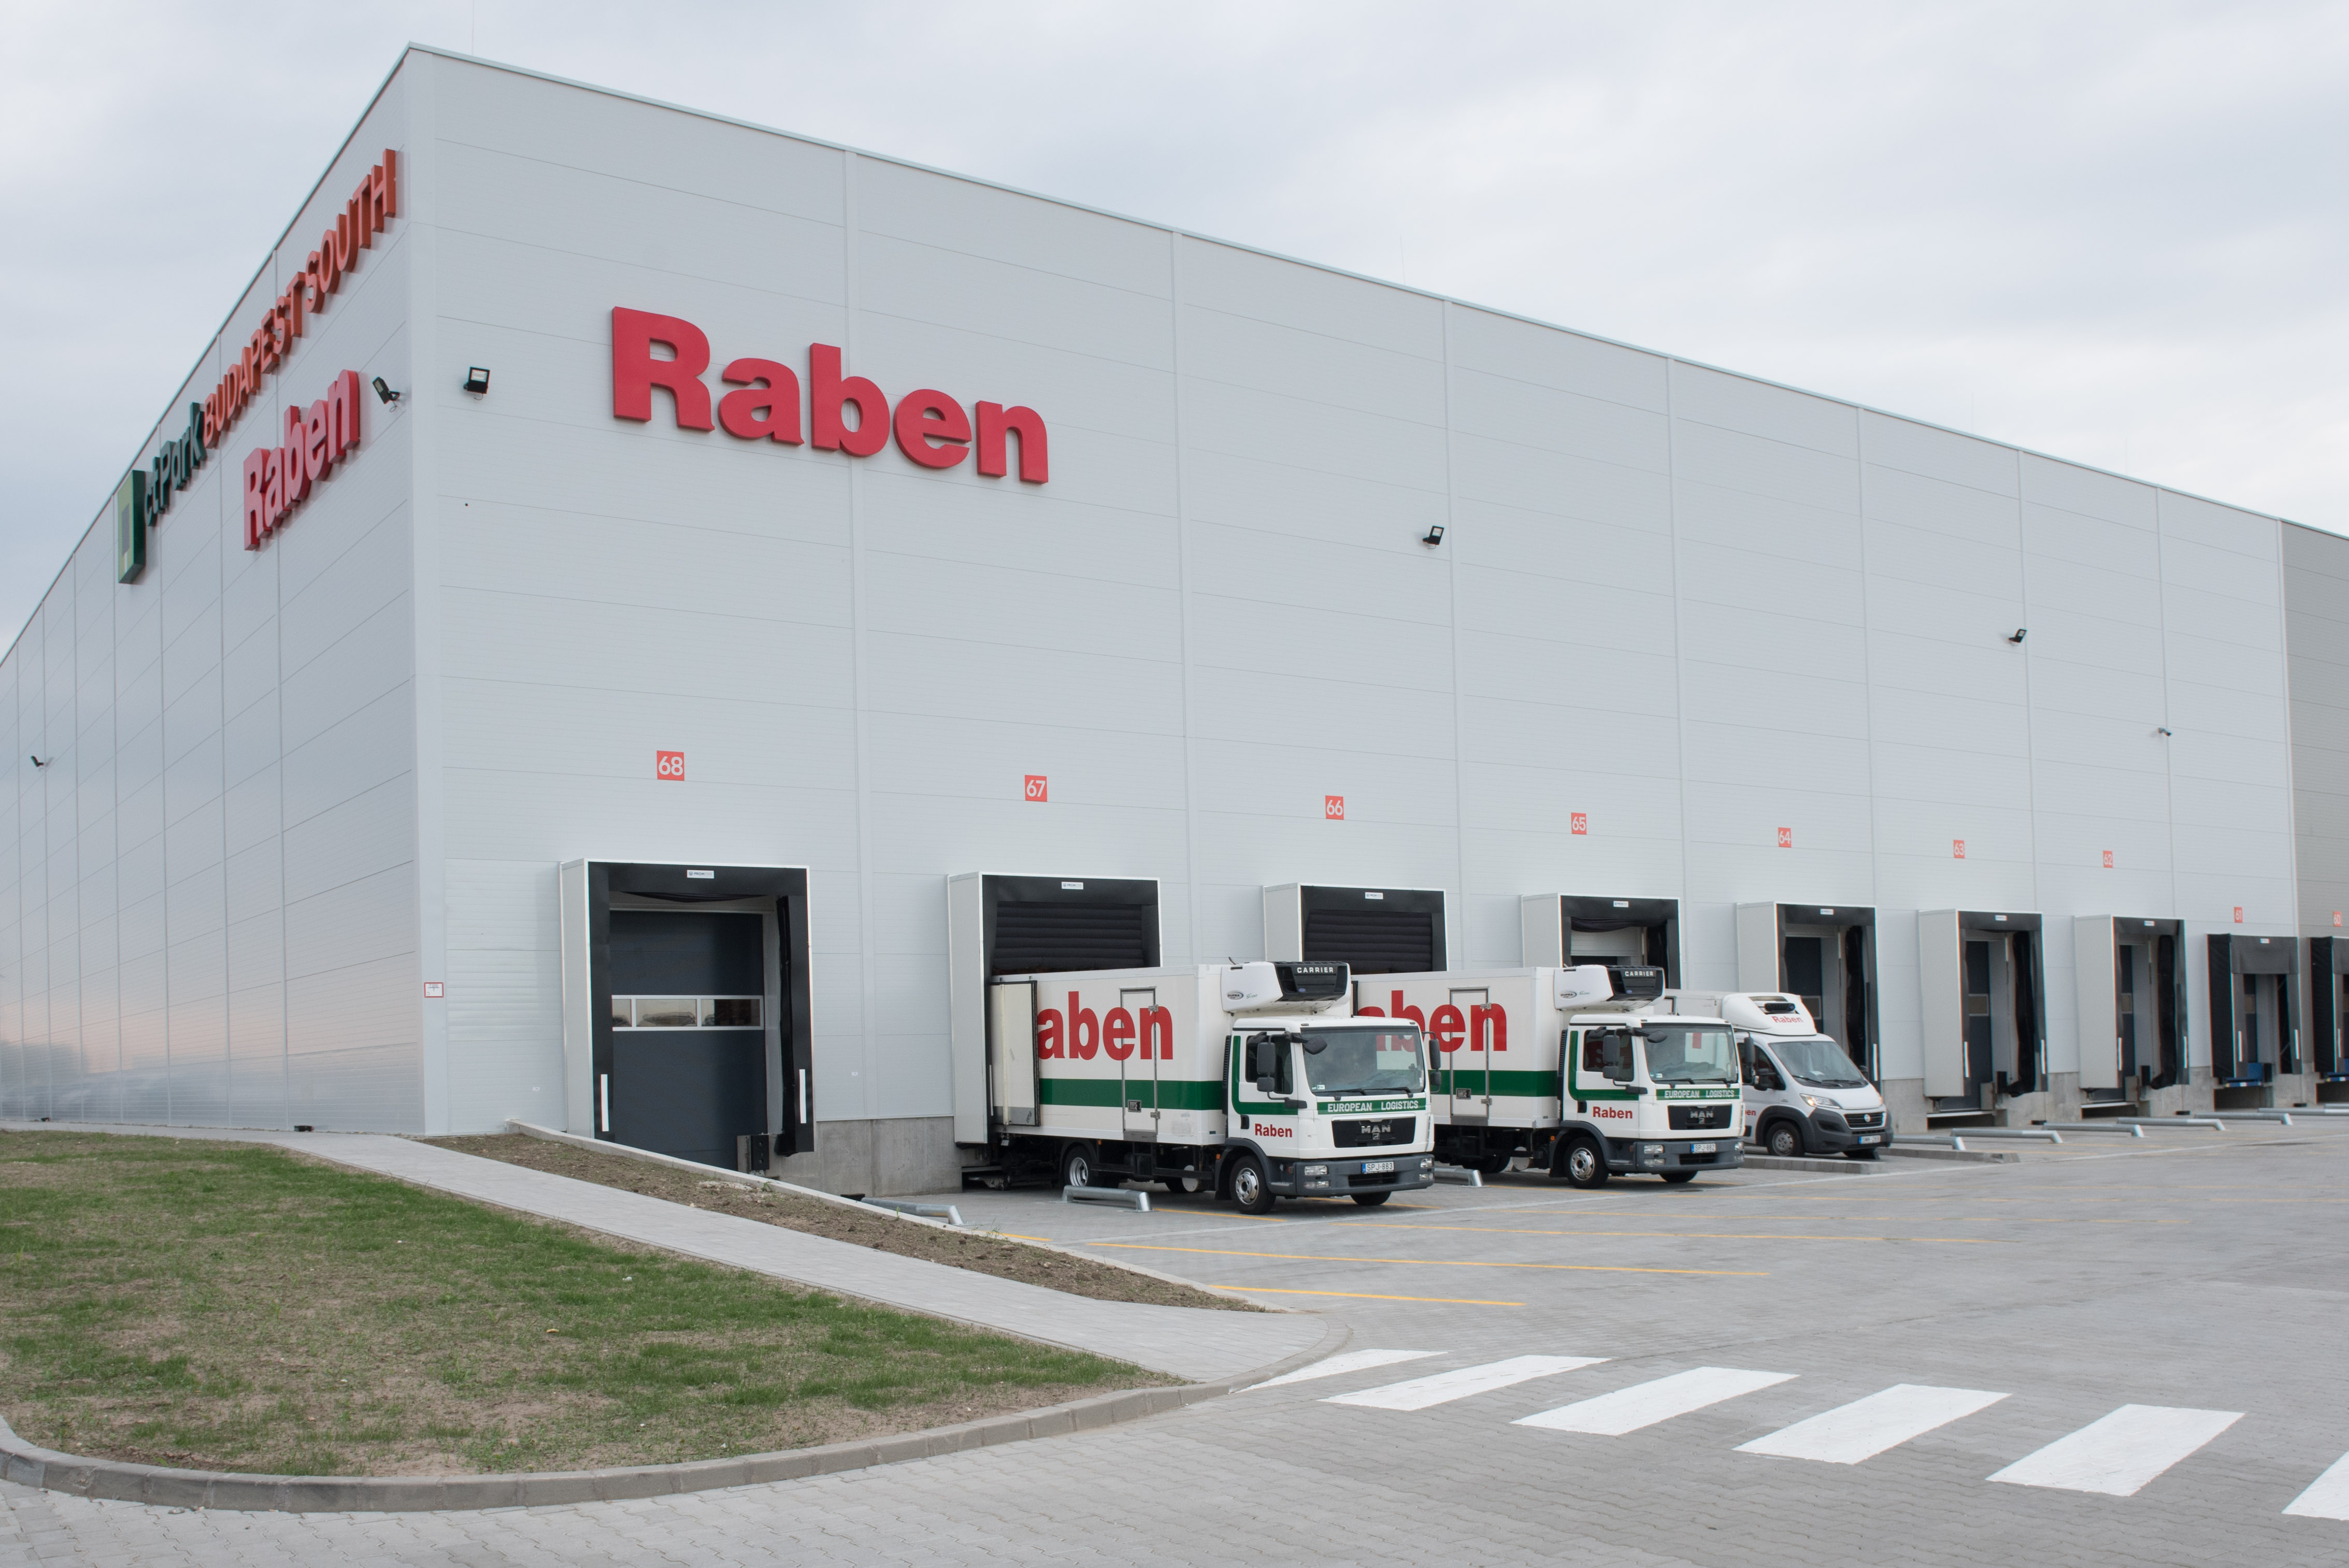 Every day on the Roads; Always on new Roads with Raben